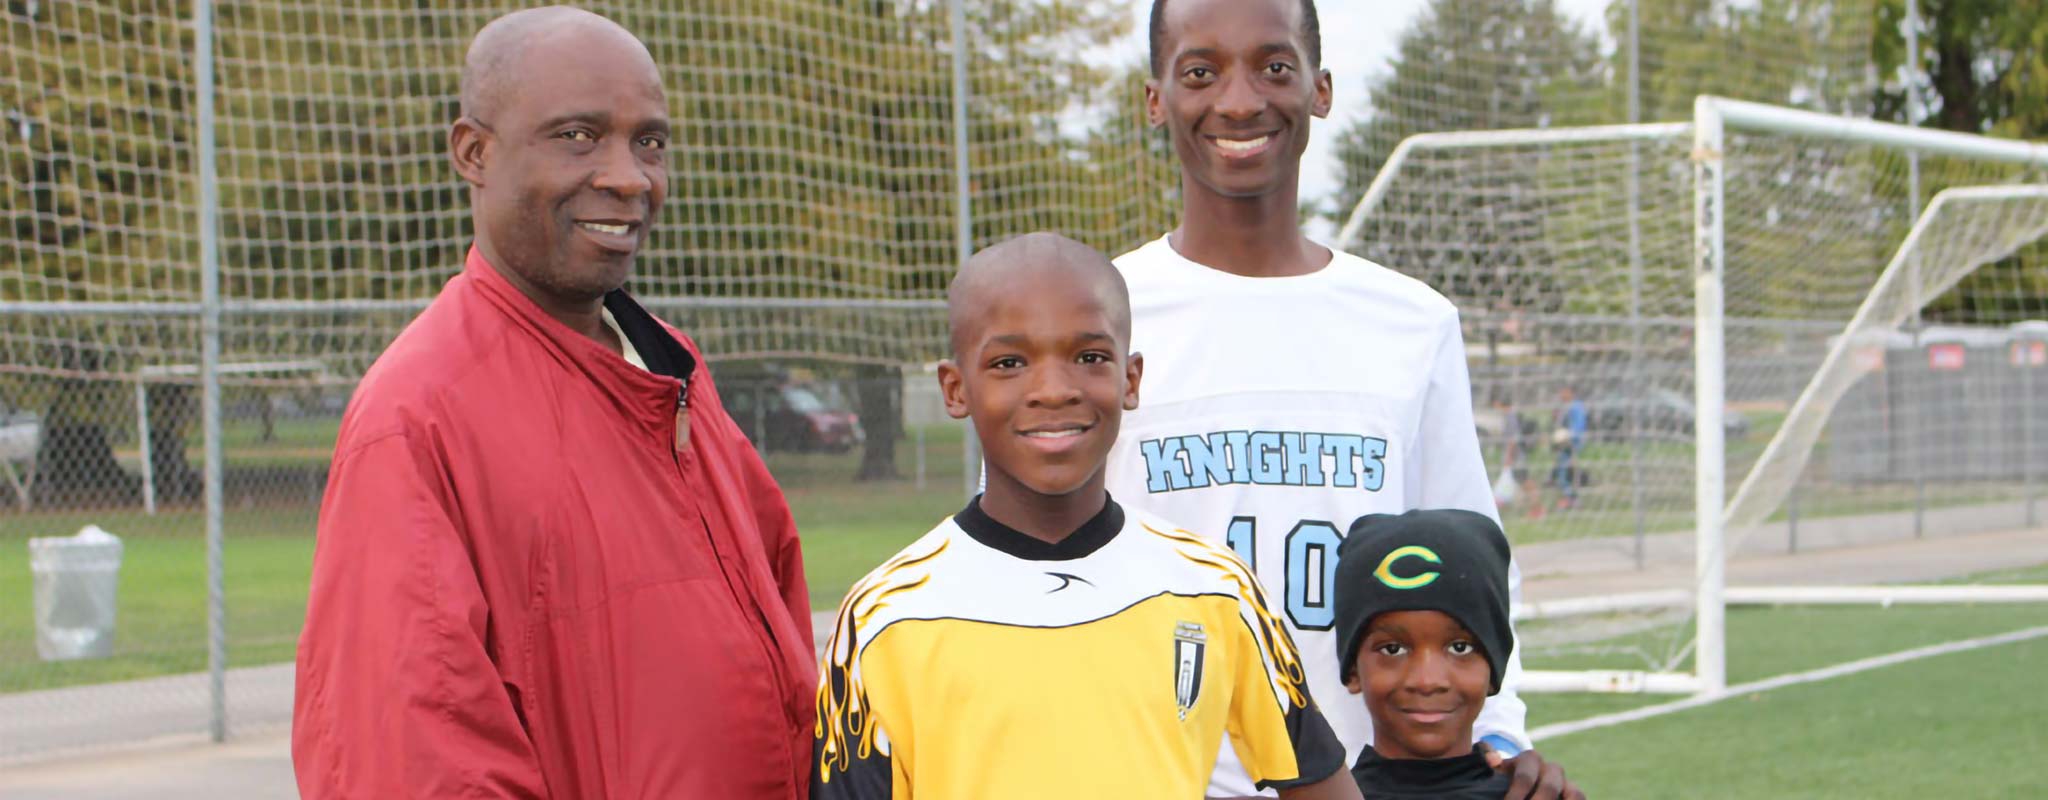 Felix Songolo of the varsity boys’ soccer team at De La Salle North Catholic High School with some family members.